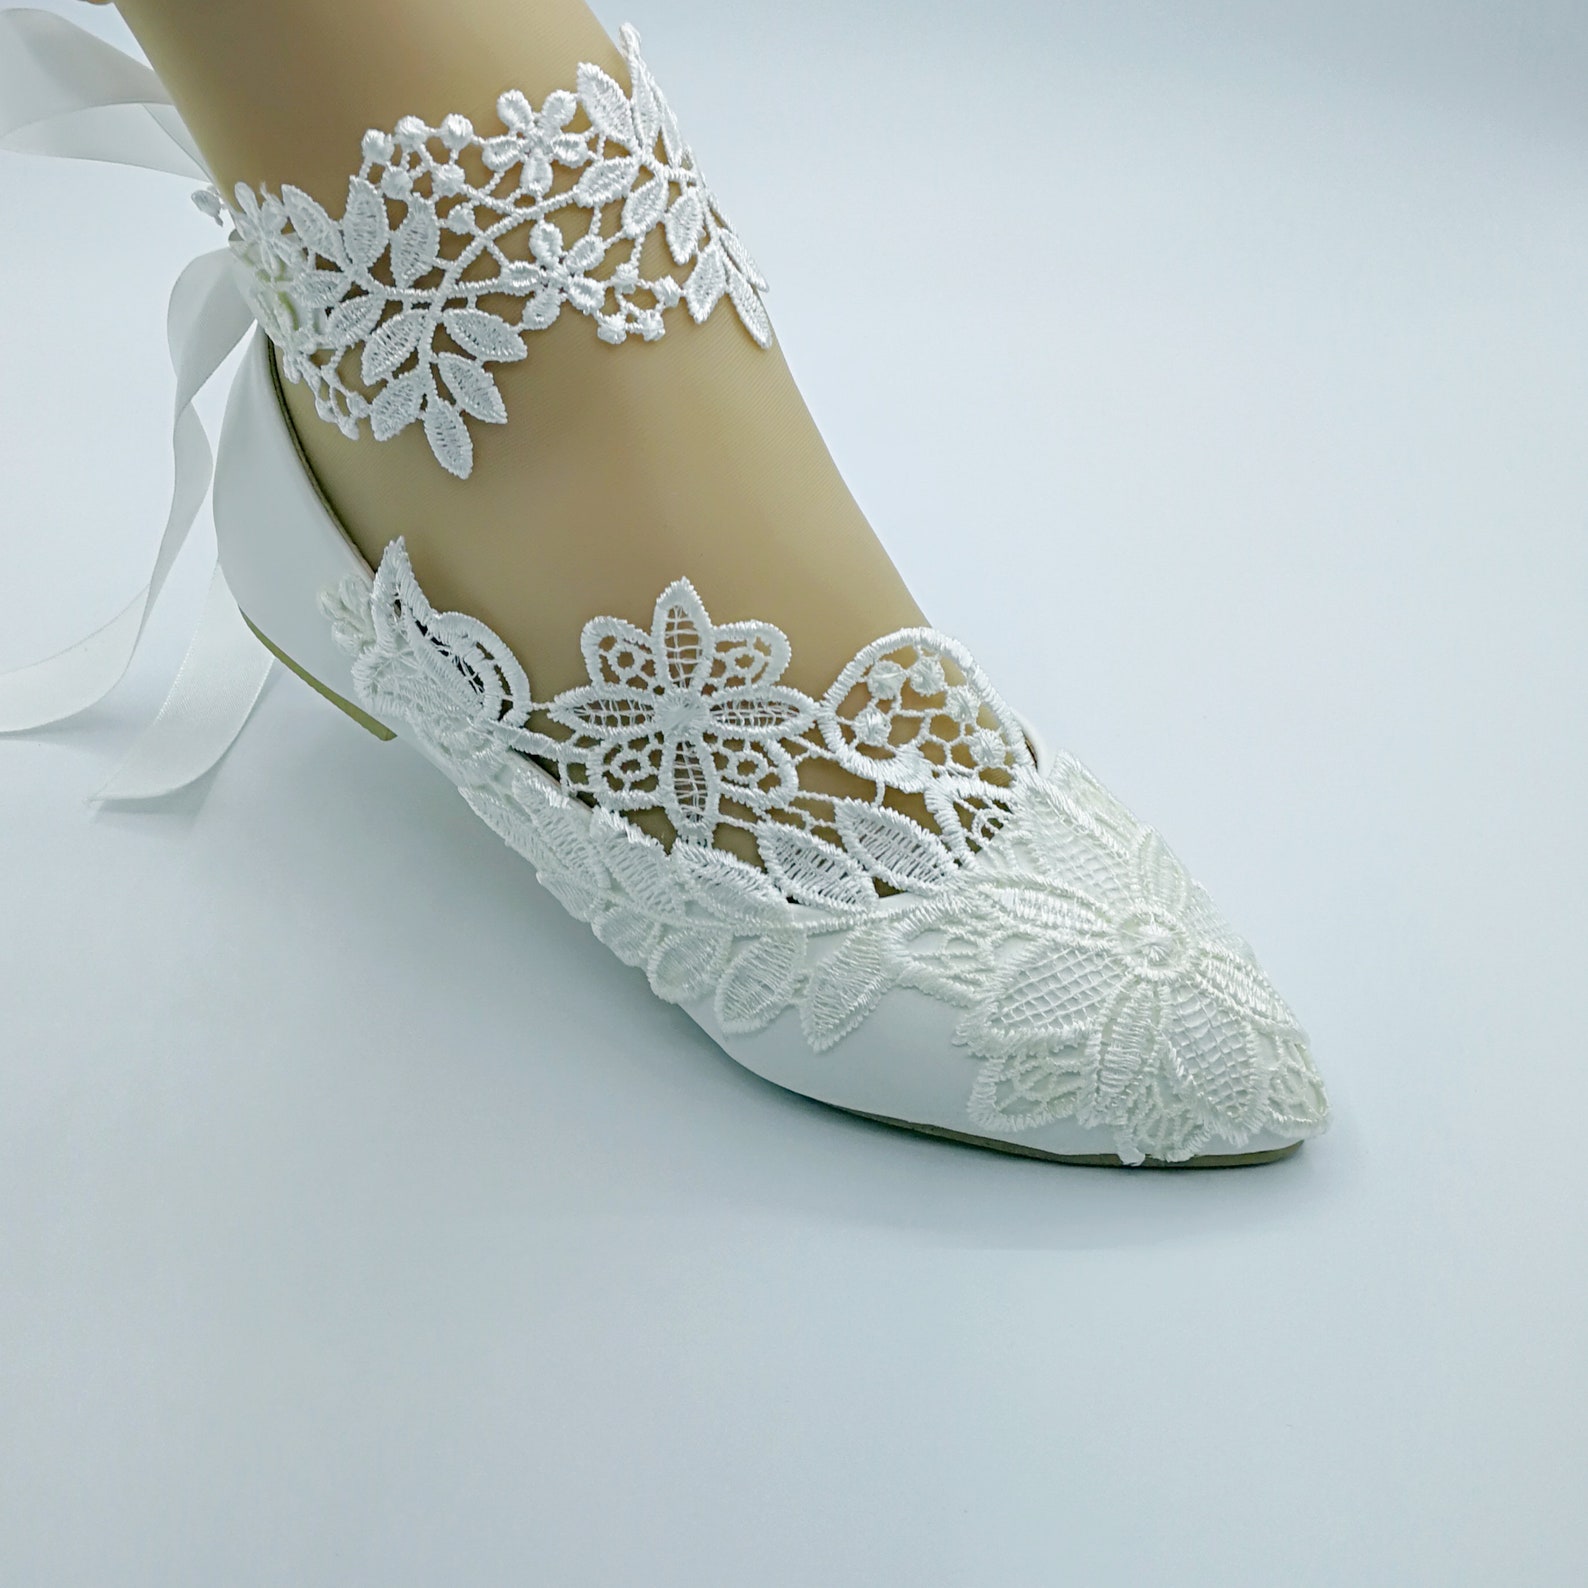 Lace Flower Lady Shoeswhite Lace Ankle Lace Trips Wedding - Etsy